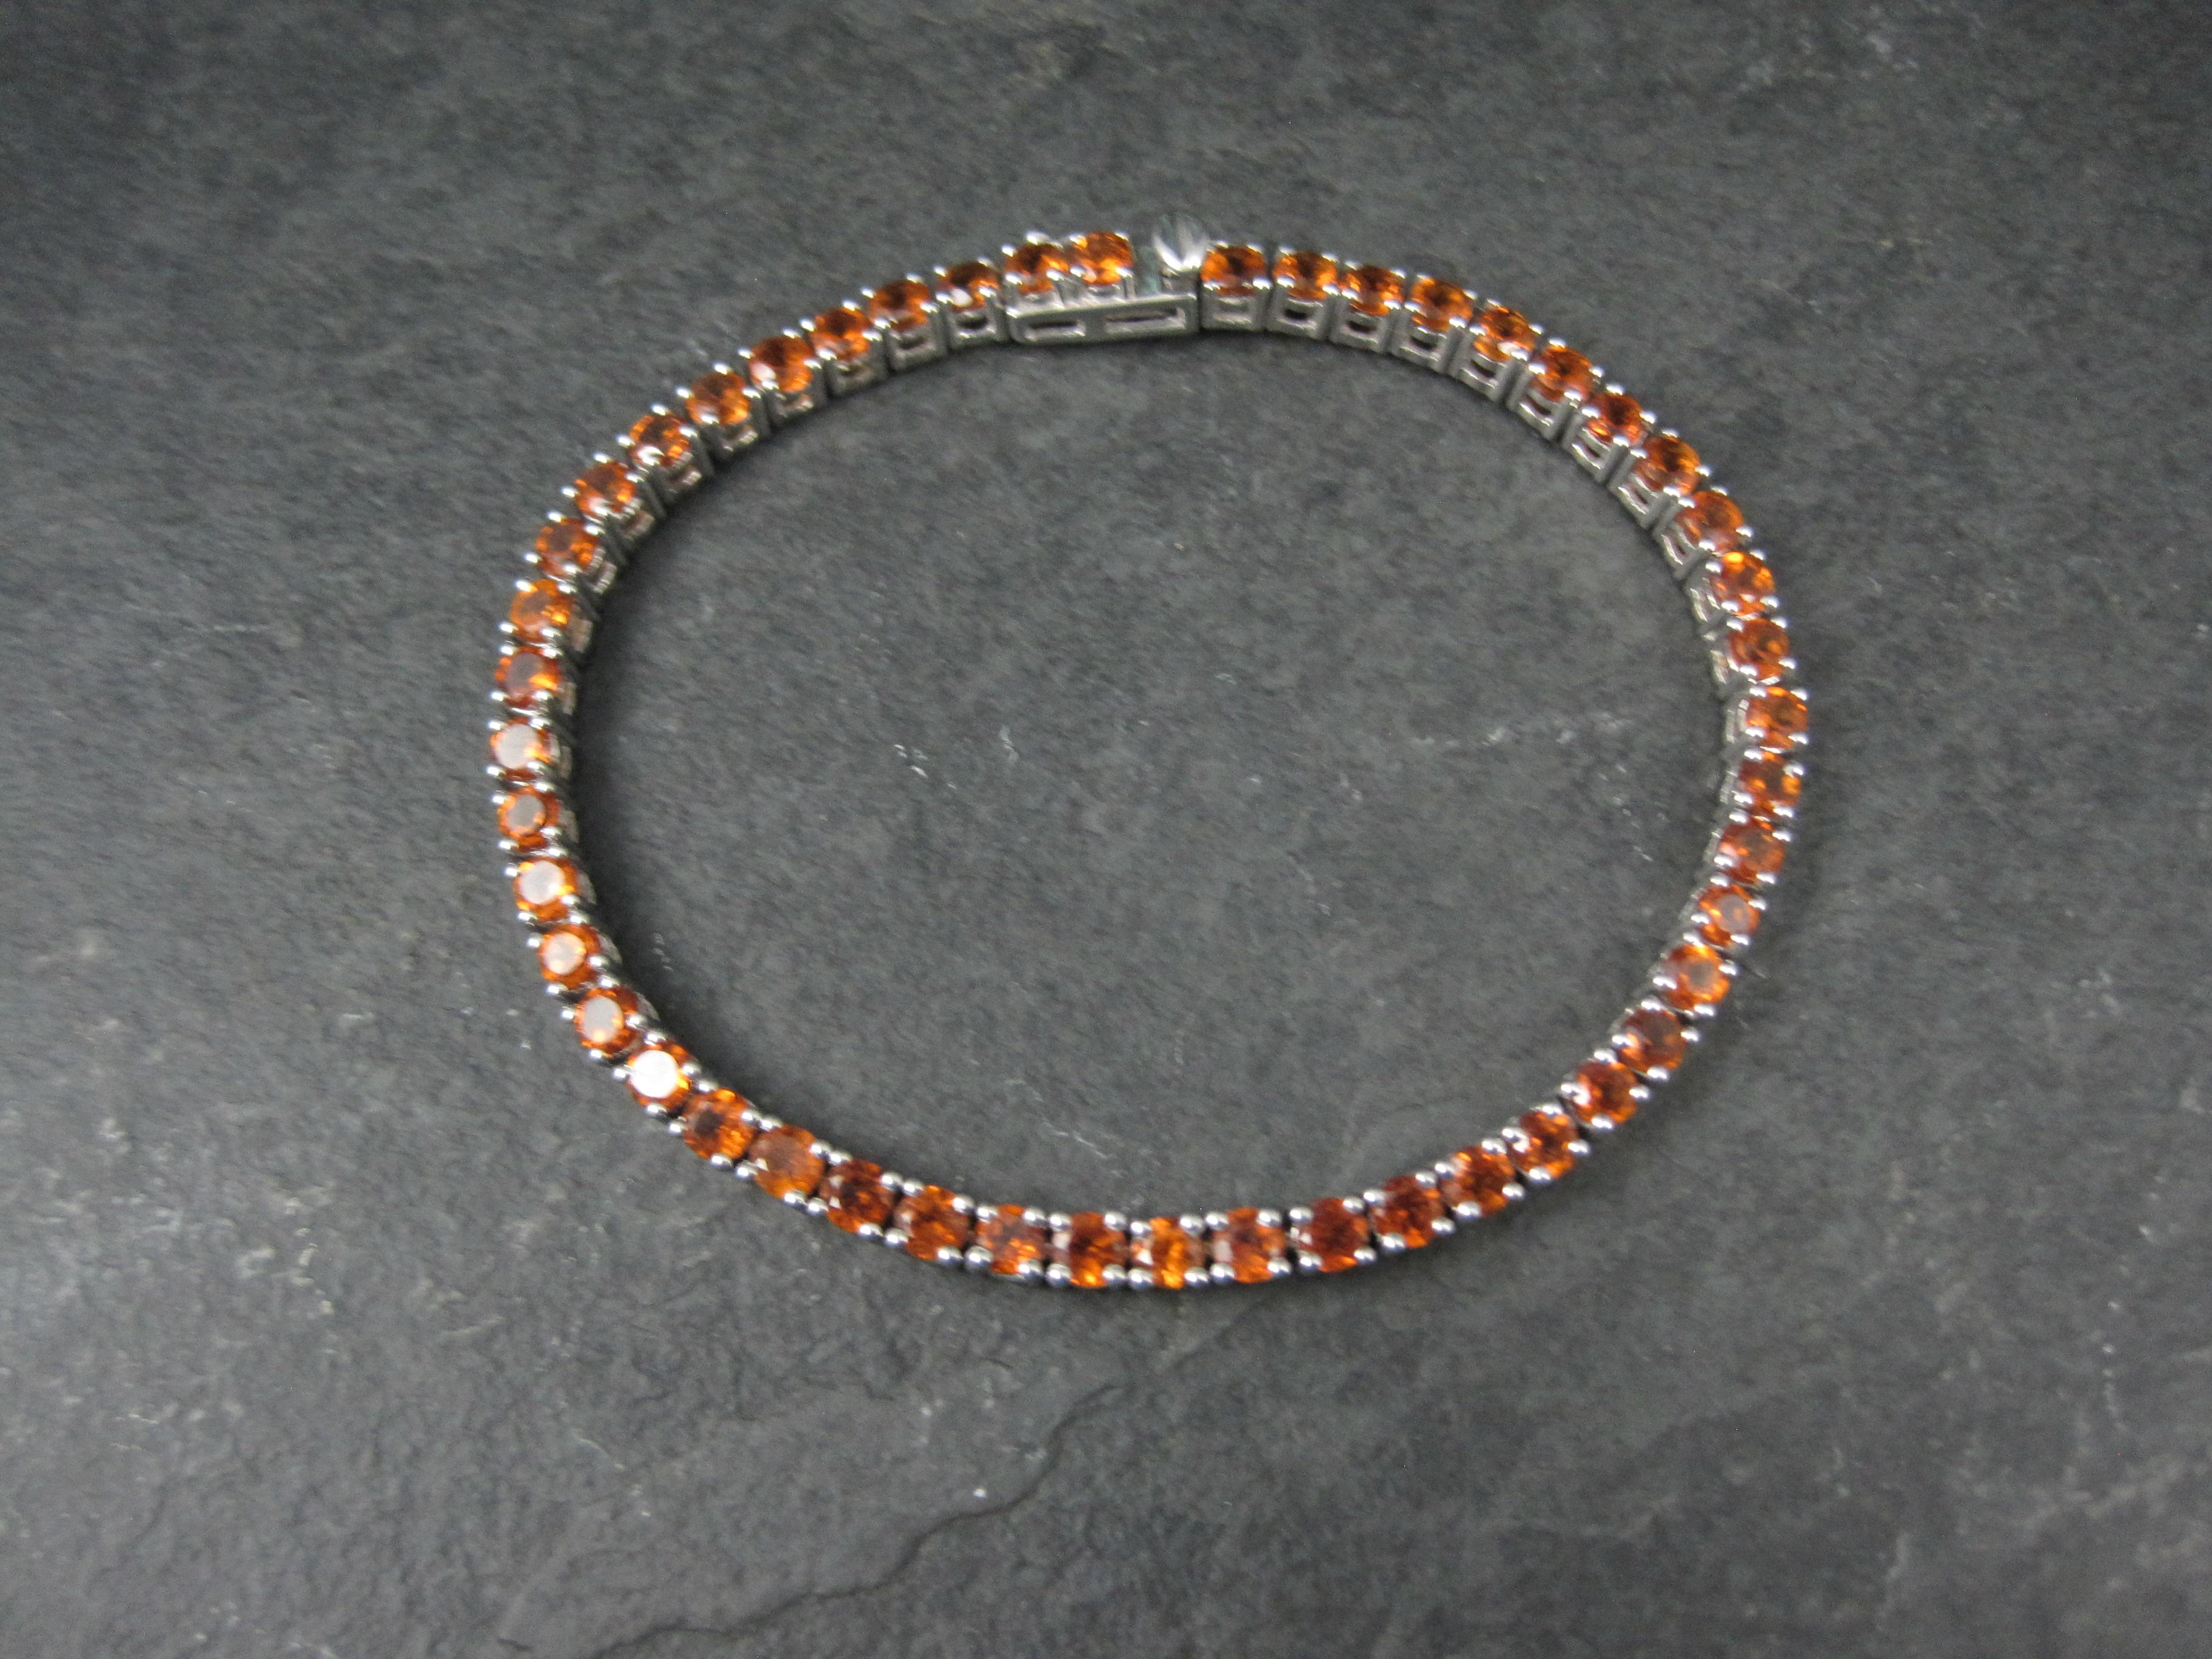 This gorgeous tennis bracelet is sterling silver with a box clasp and safety catch.
It features 48 round cut 3mm Madeira citrine gemstones.

Measurements: 1/8 of an inch wide, 7 1/2 wearable inches
Weight: 13.4 grams

Condition: New old stock from